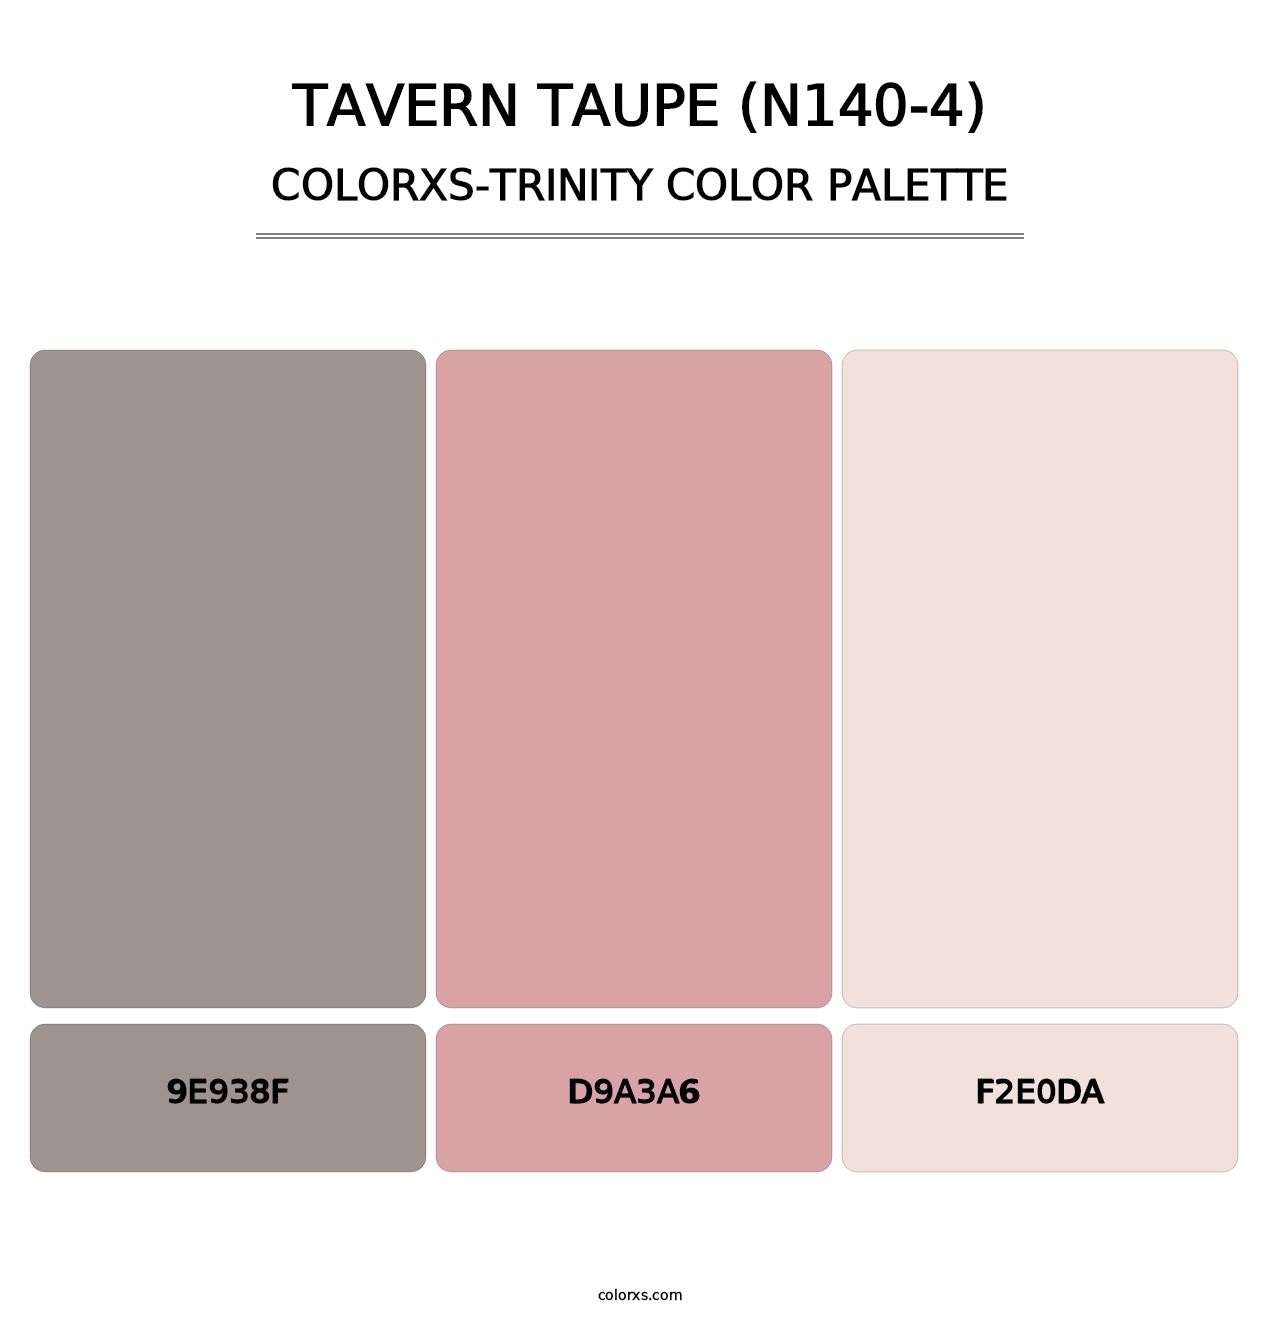 Tavern Taupe (N140-4) - Colorxs Trinity Palette